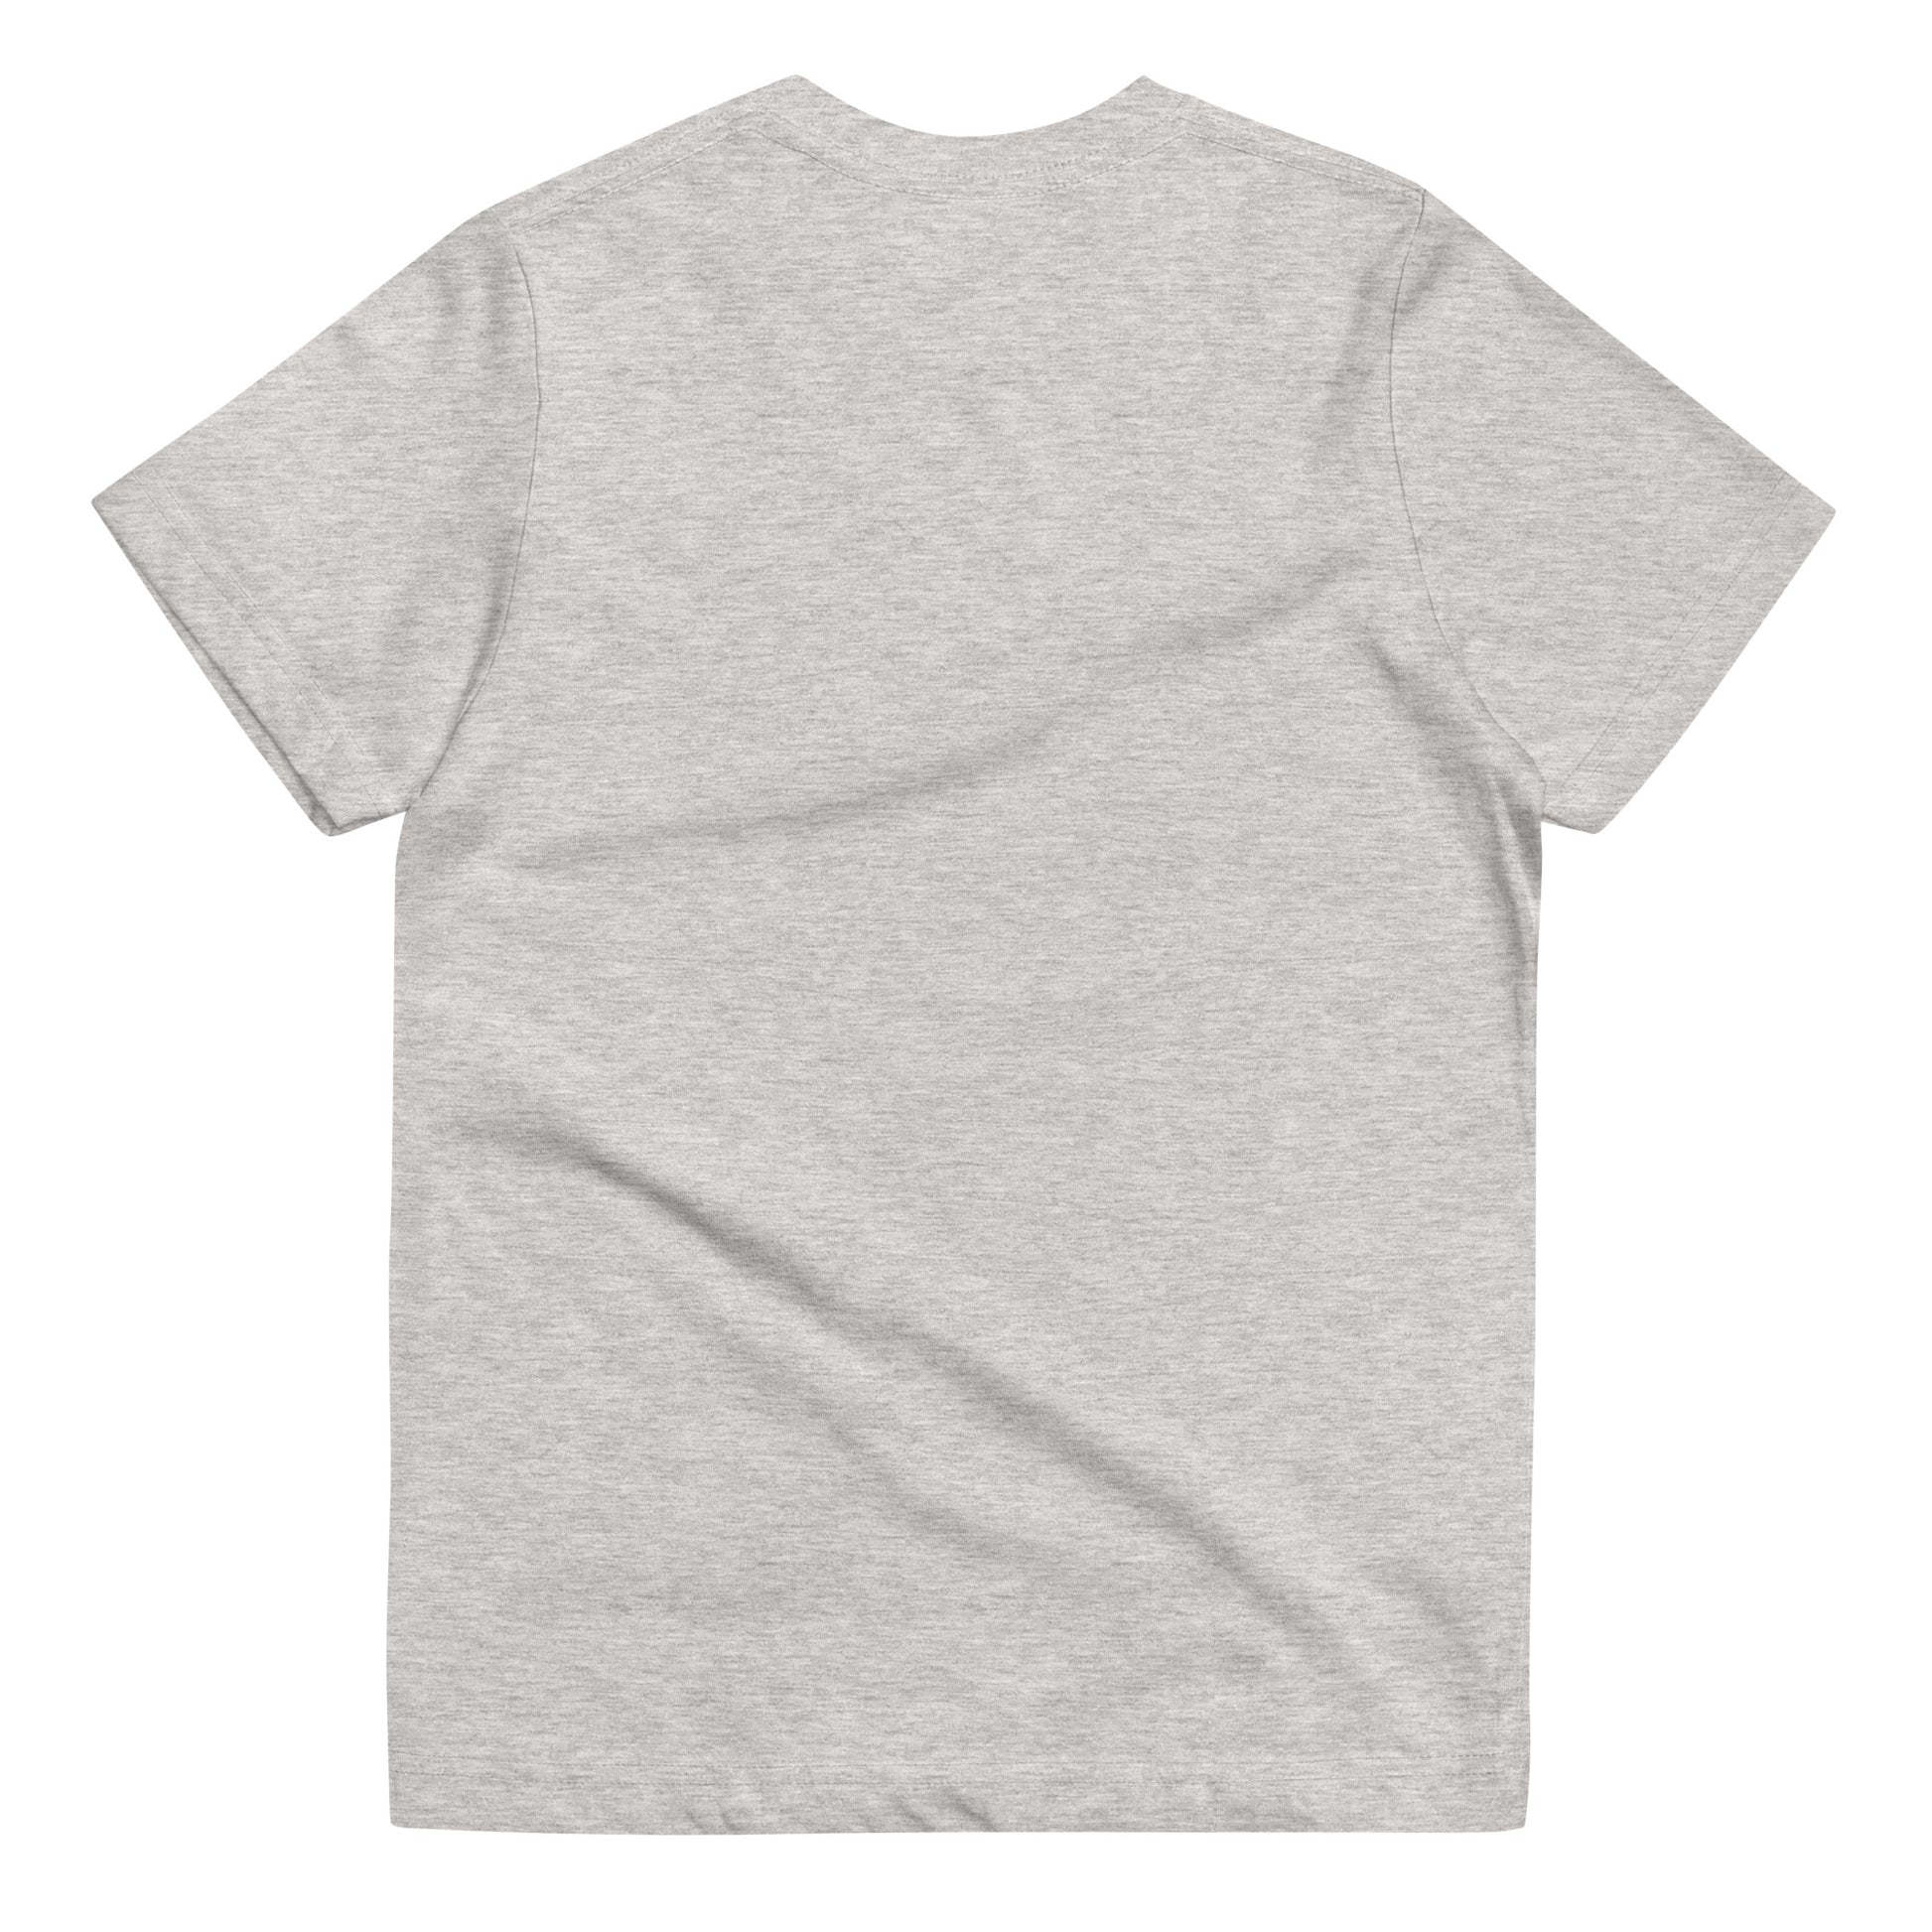  Kids T-Shirt - Natural / Heather colour - Back flat lay view - Go Sea Kayak Byron Bay Crew (issue 2018-2019) logo on front - Genuine Byron Bay Merchandise | Produced by Go Sea Kayak Byron Bay 